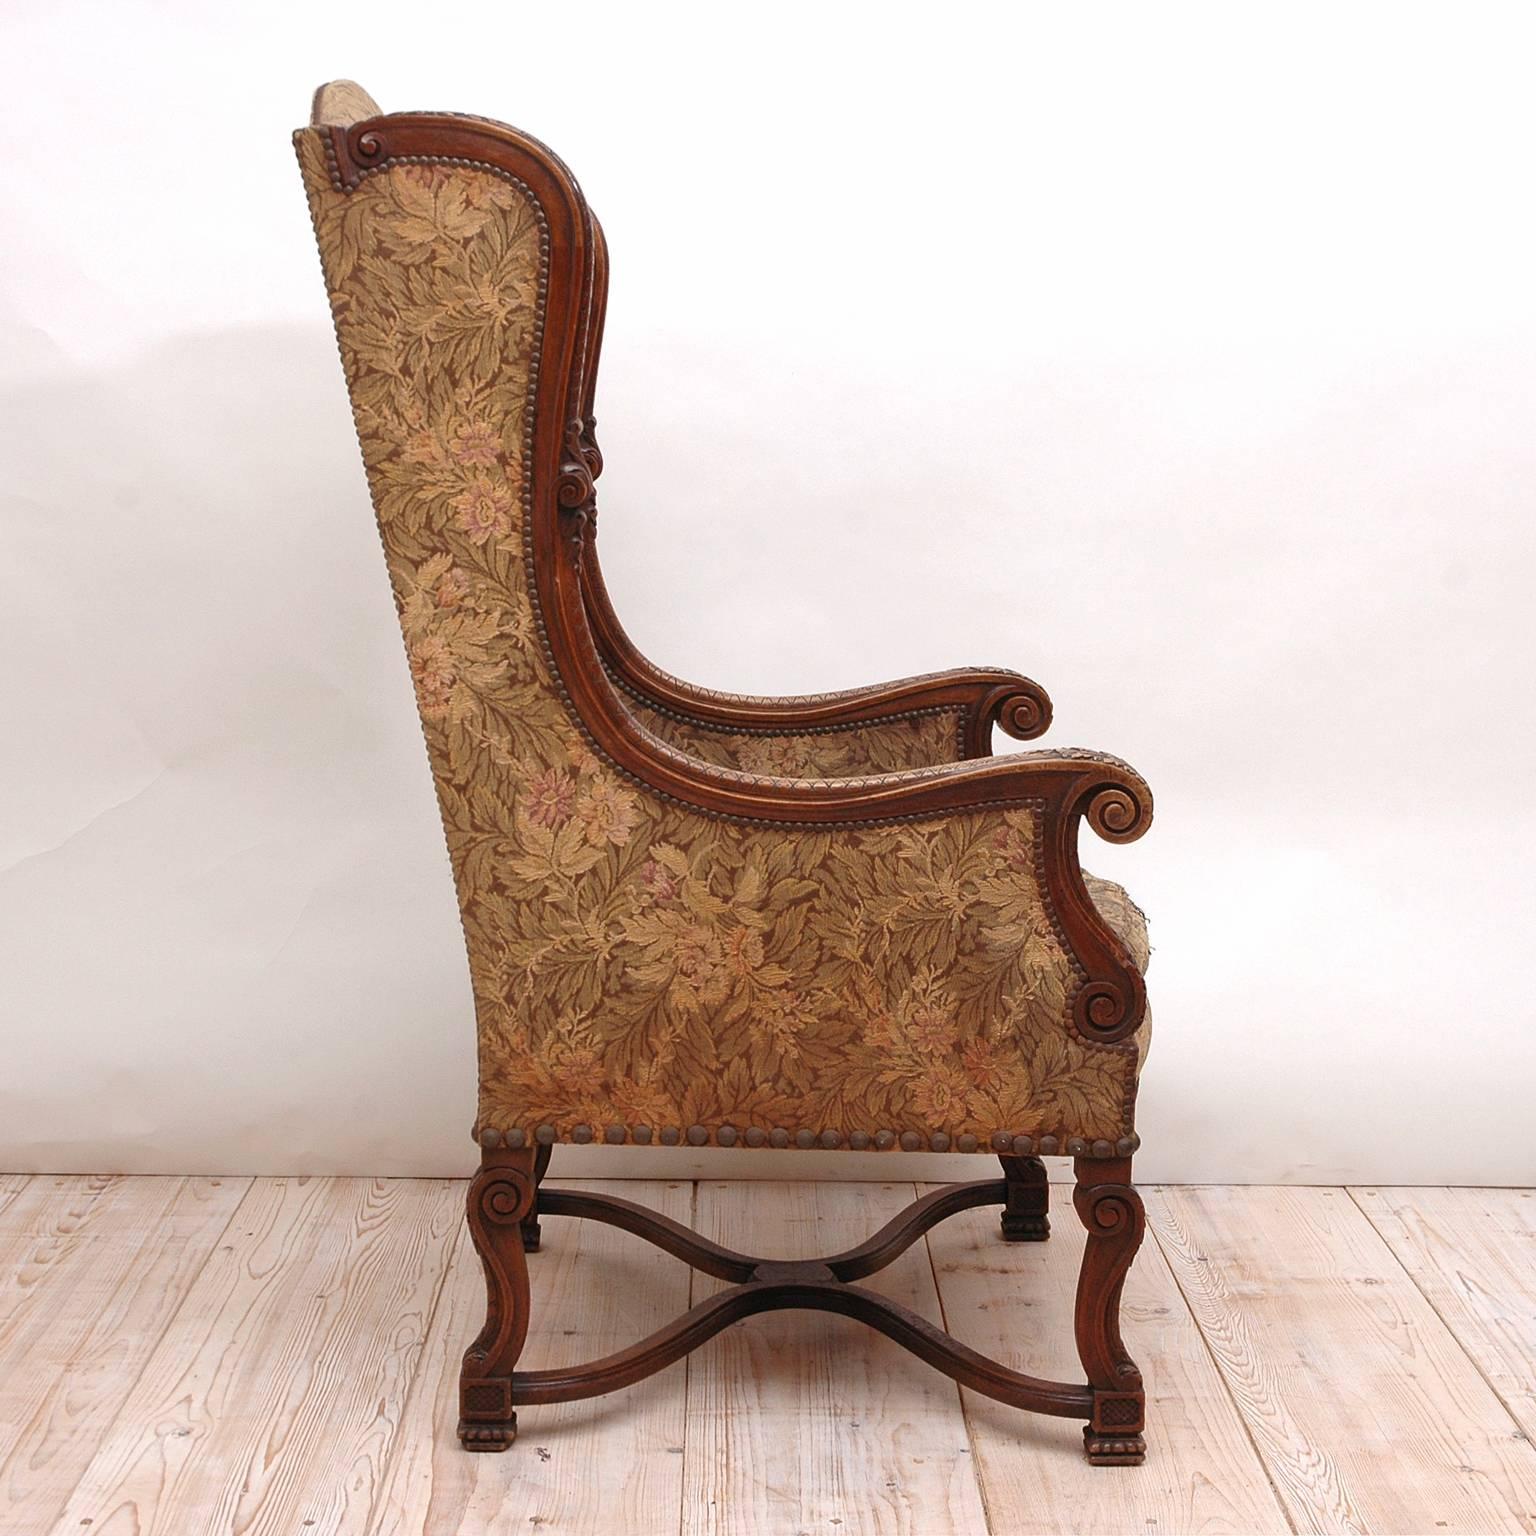 19th Century Neo-Renaissance Style Carved Wingback Chair with Upholstery In Good Condition For Sale In Miami, FL